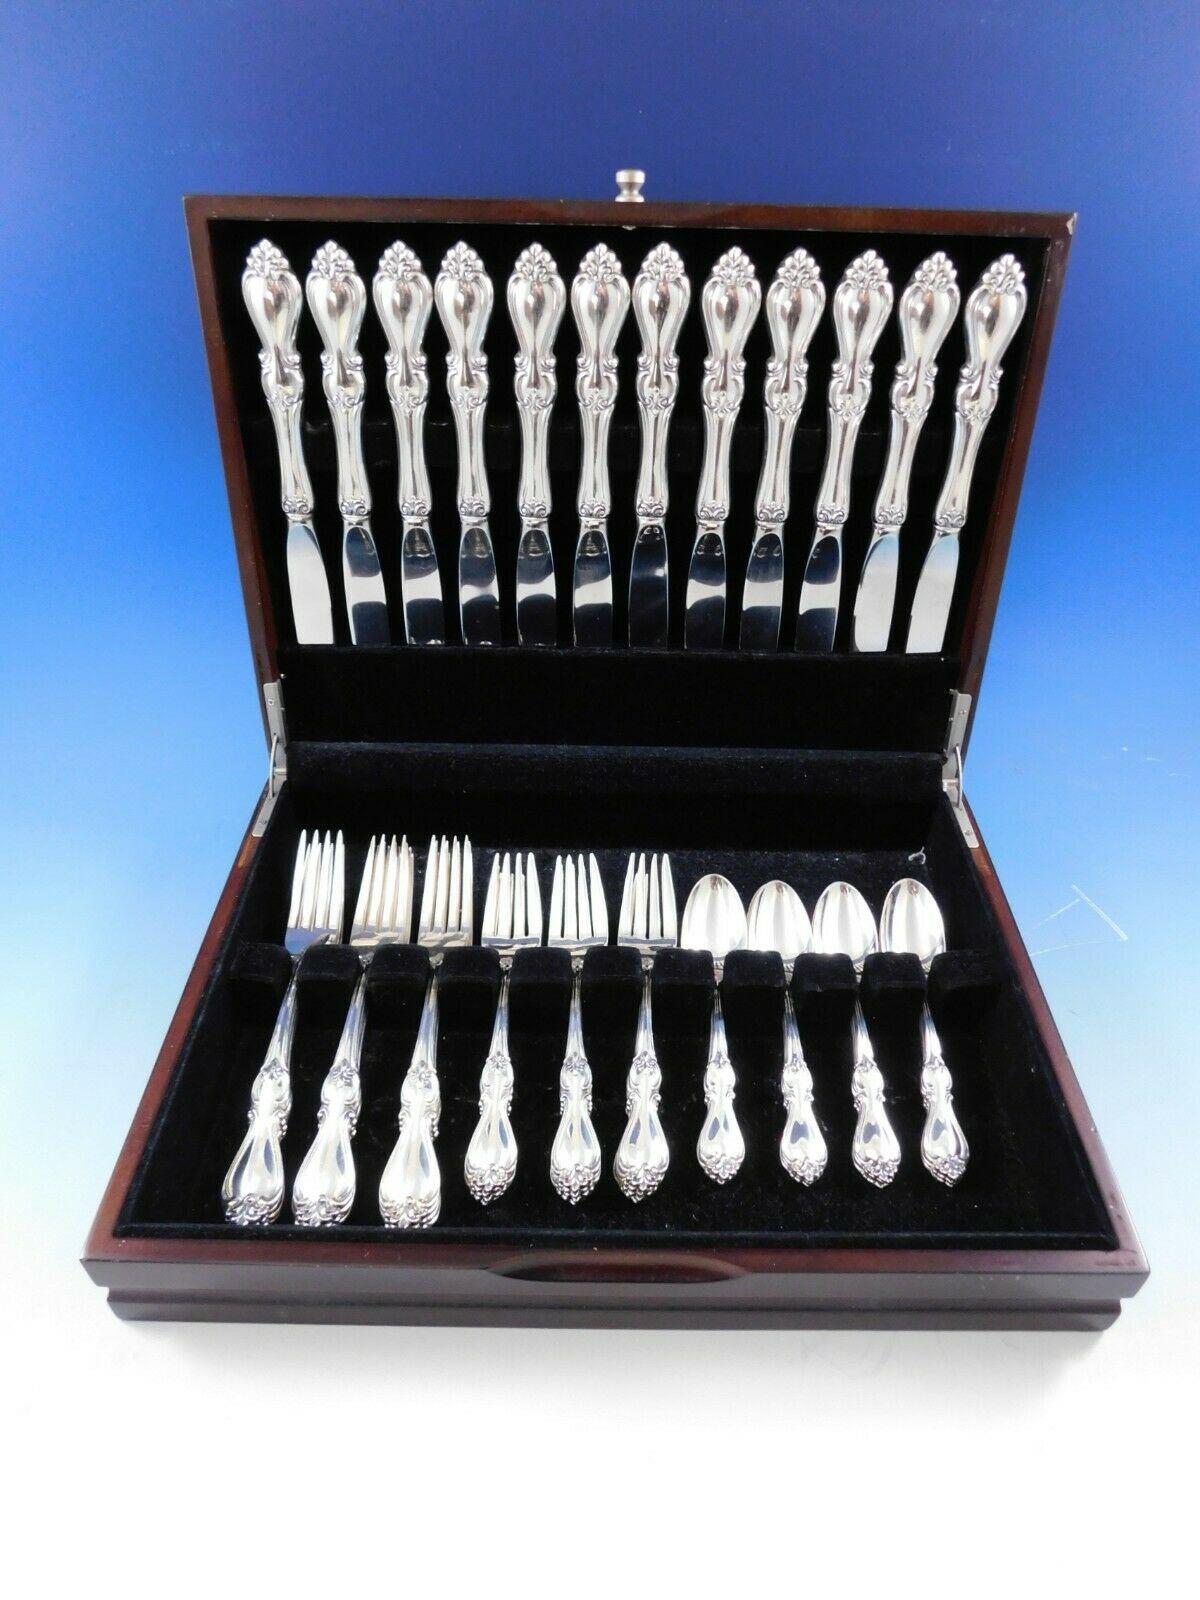 Dinner size Queen Elizabeth I by Towle sterling silver flatware set, 48 pieces. This set includes:

12 dinner size knives, 9 5/8